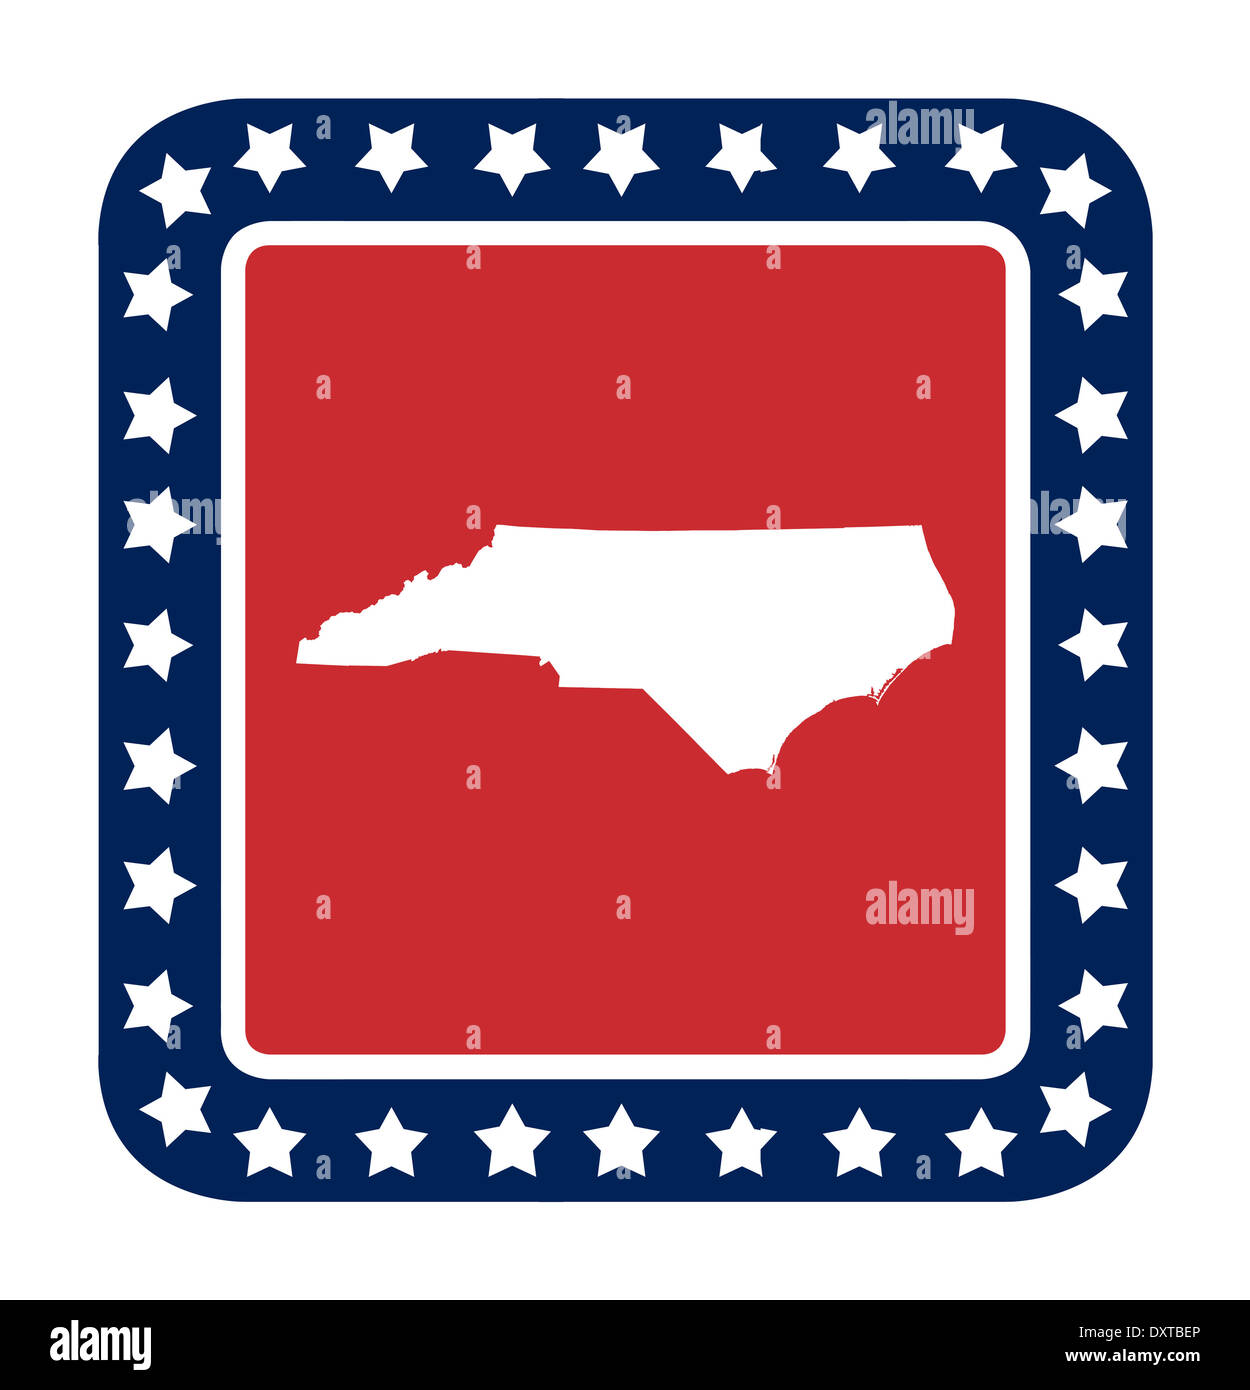 North Carolina state button on American flag in flat web design style, isolated on white background. Stock Photo